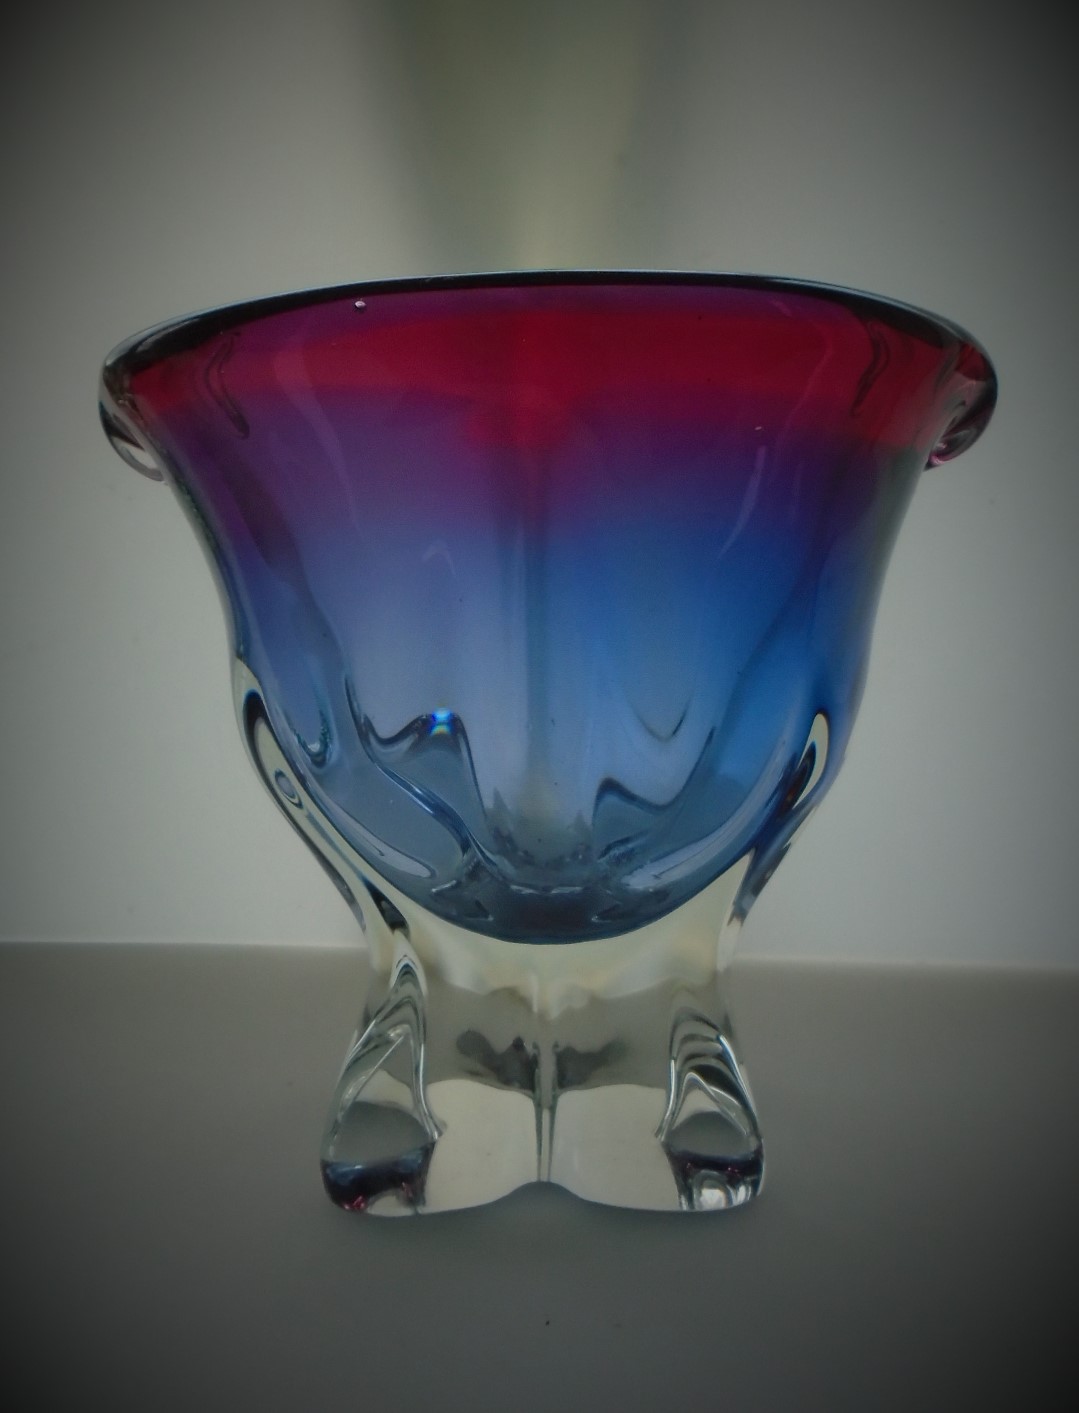 Offered for sale is what I believe to be a stunning example of Vintage Czech Glass in the form of this Chribska purple/pinky/ blue free form Vase